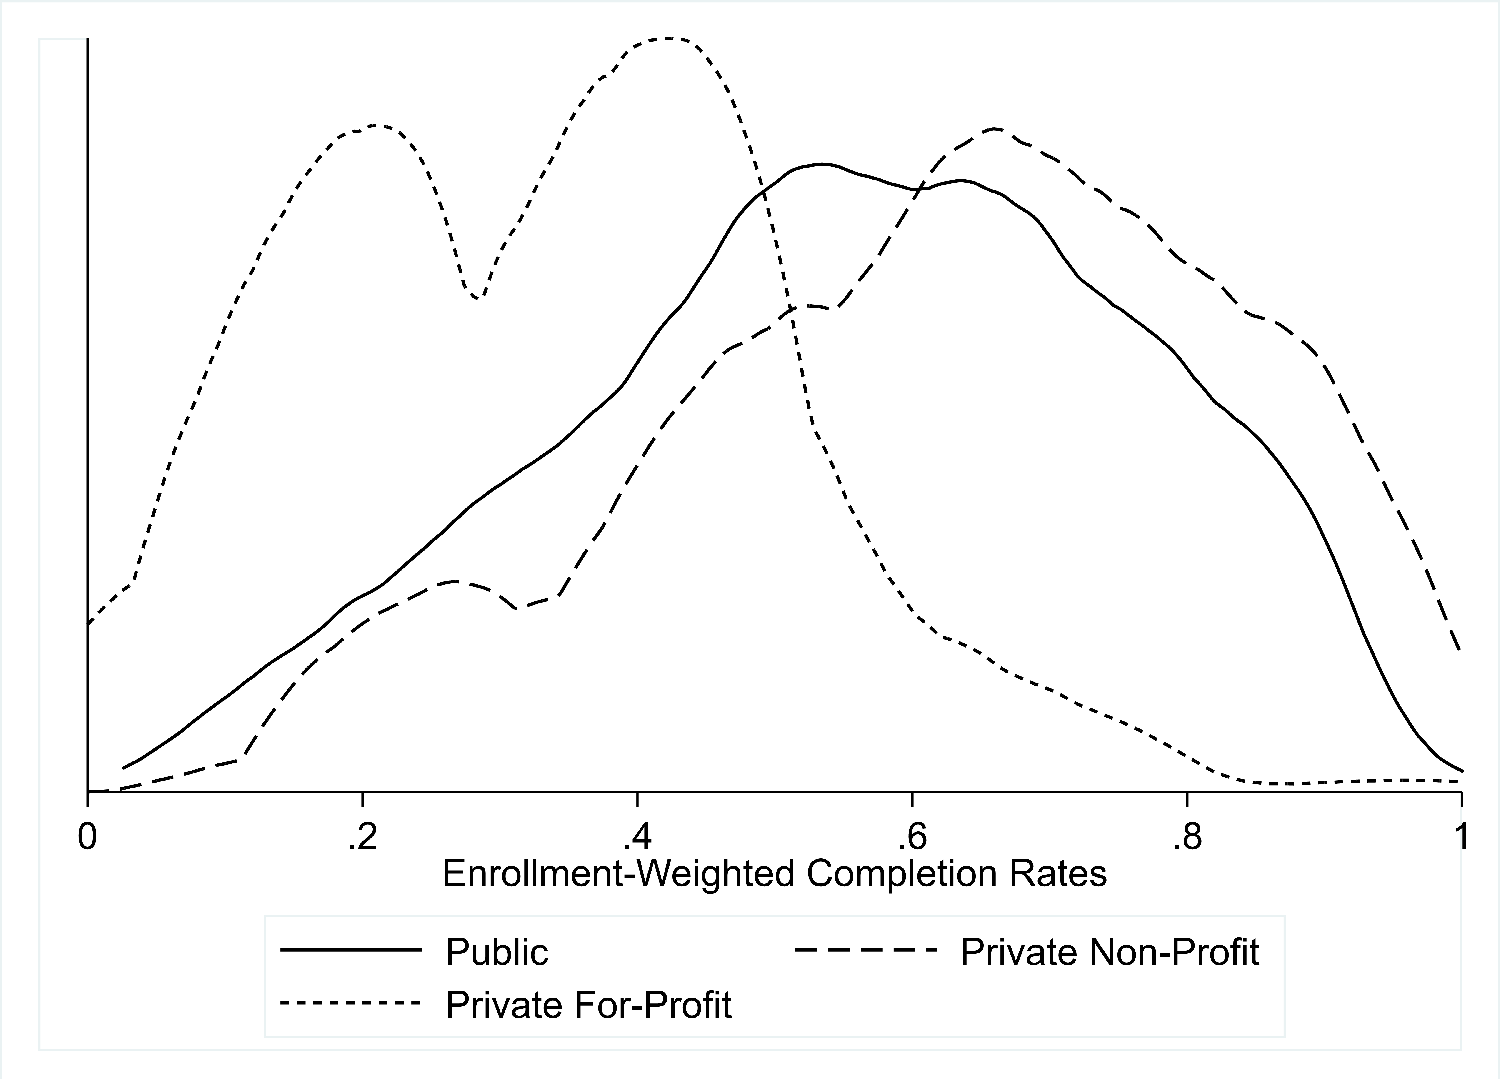 Figure 1. Distribution of Completion Rates. See accessible link for data.